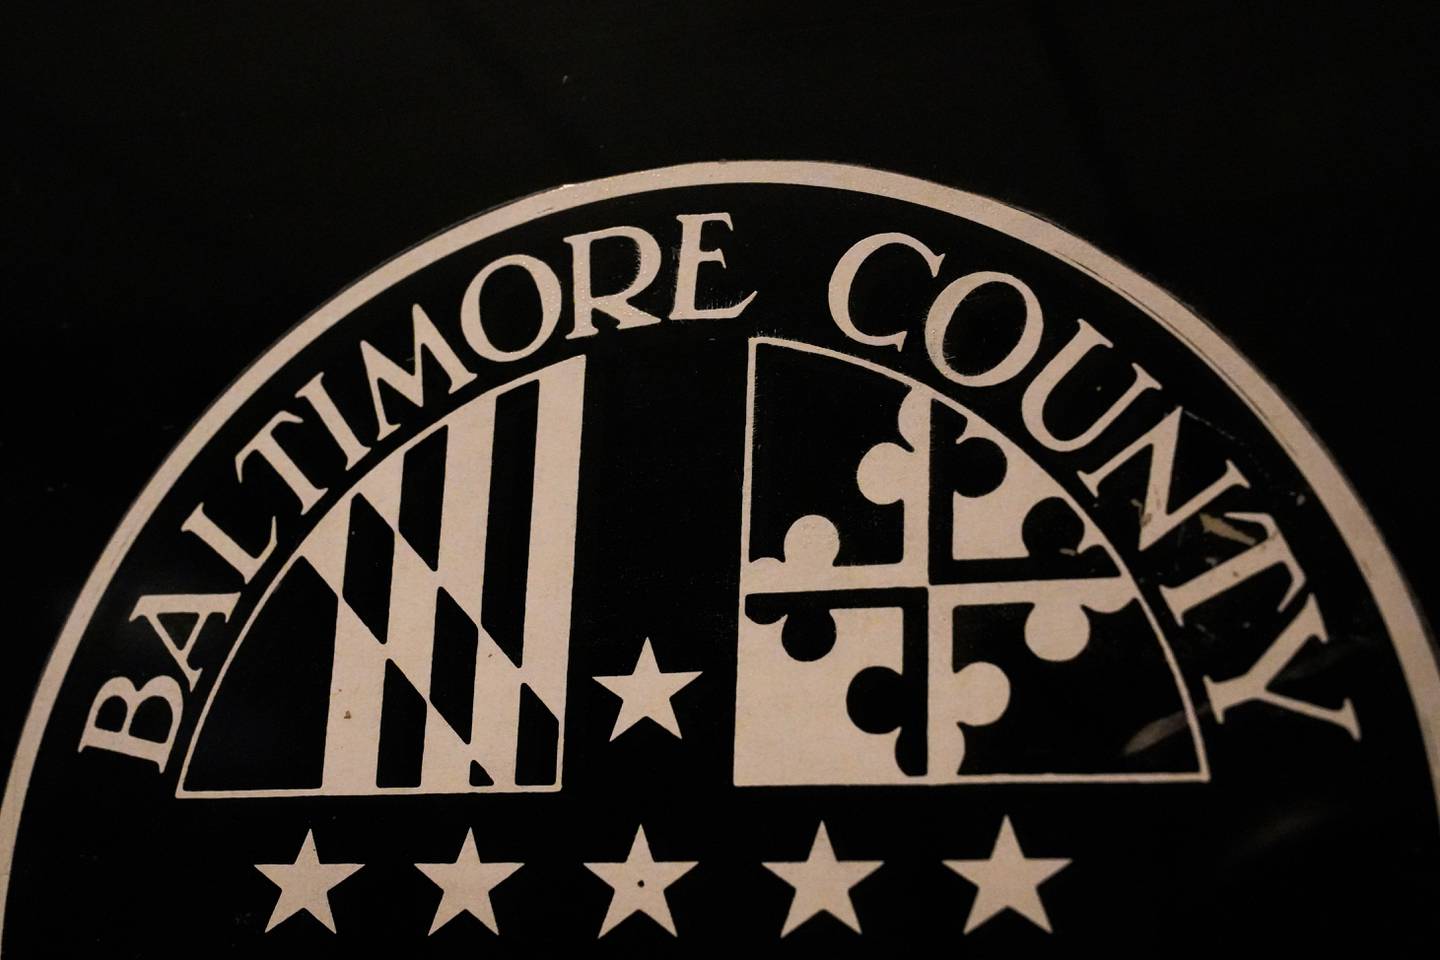 6/16/22—A decal reading “Baltimore County Maryland” is on a door inside the historic Baltimore County Courthouse in Towson, the center of county government.